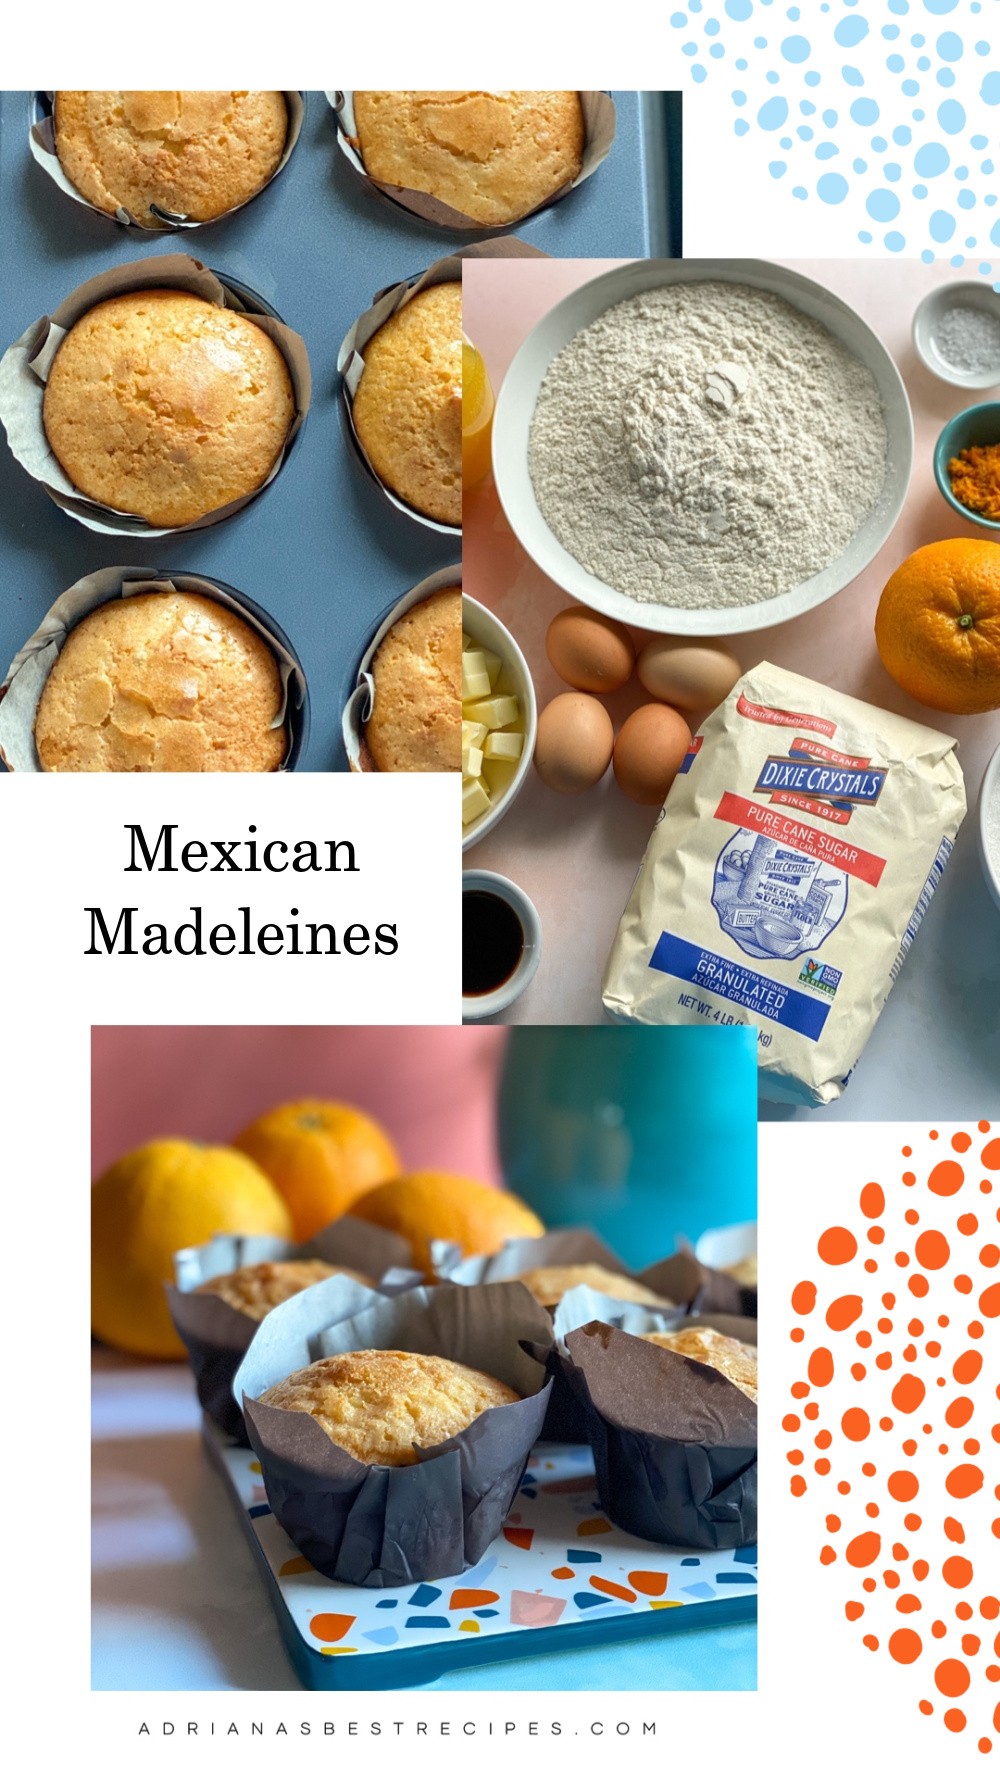 Mexican madeleines made with Dixie Crystals, butter, wheat flour, fresh orange juice, milk, and other ingredients